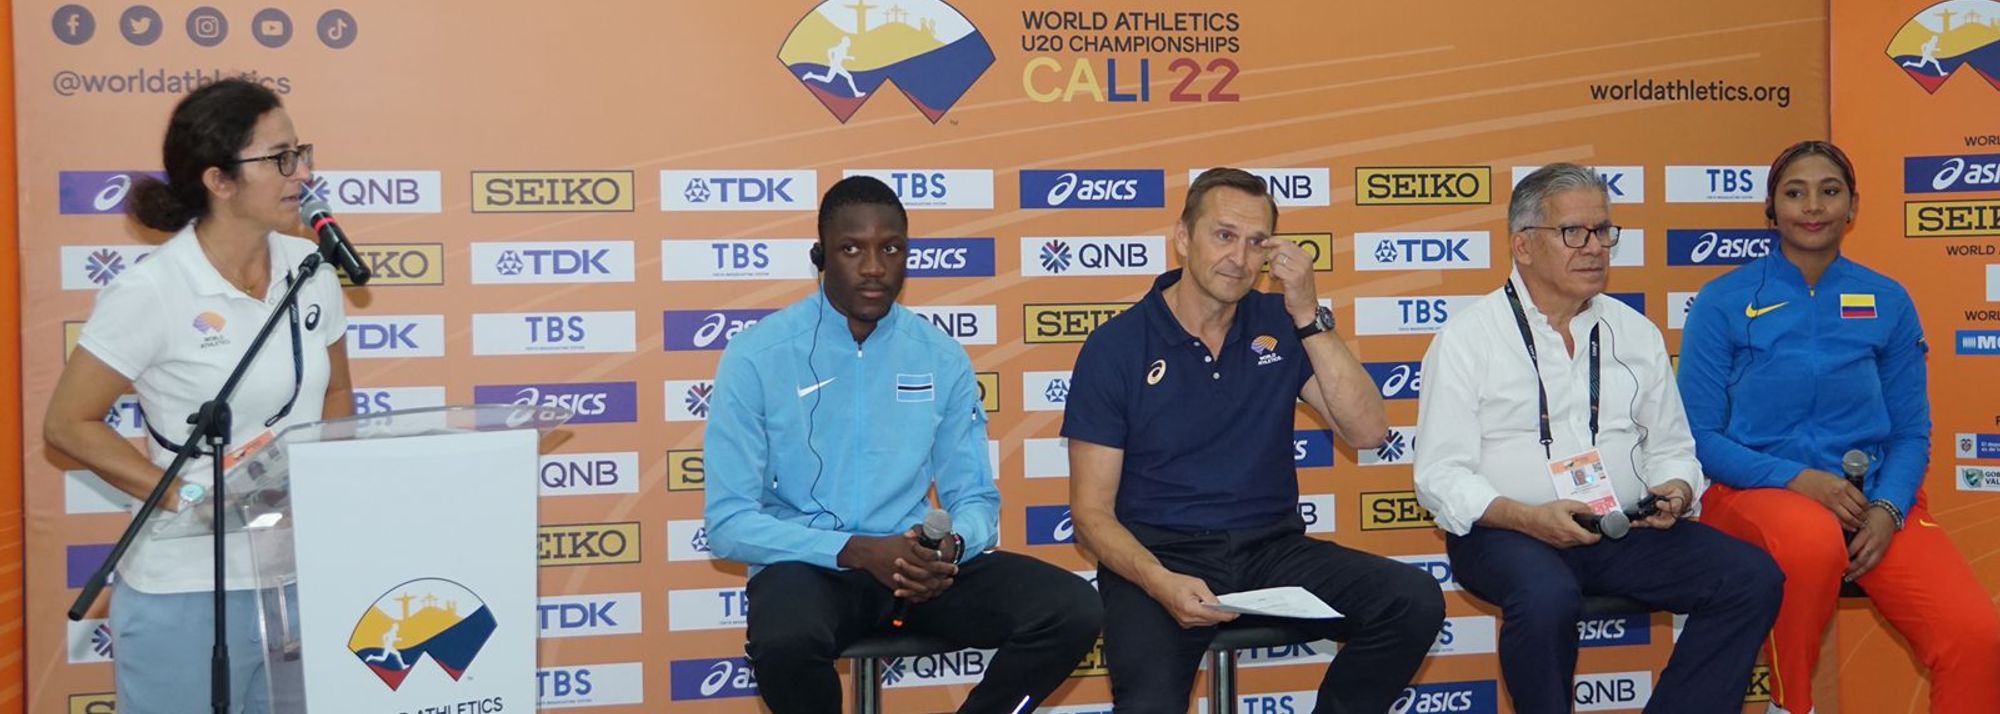 The  World Athletics u20 Championships Cali 2022 ended and the records, the experiences, the stories, a fantastic scenario and a geography favorable for the sport, were the factors that came up the most at the press conference  that took place before the last day of competitions.